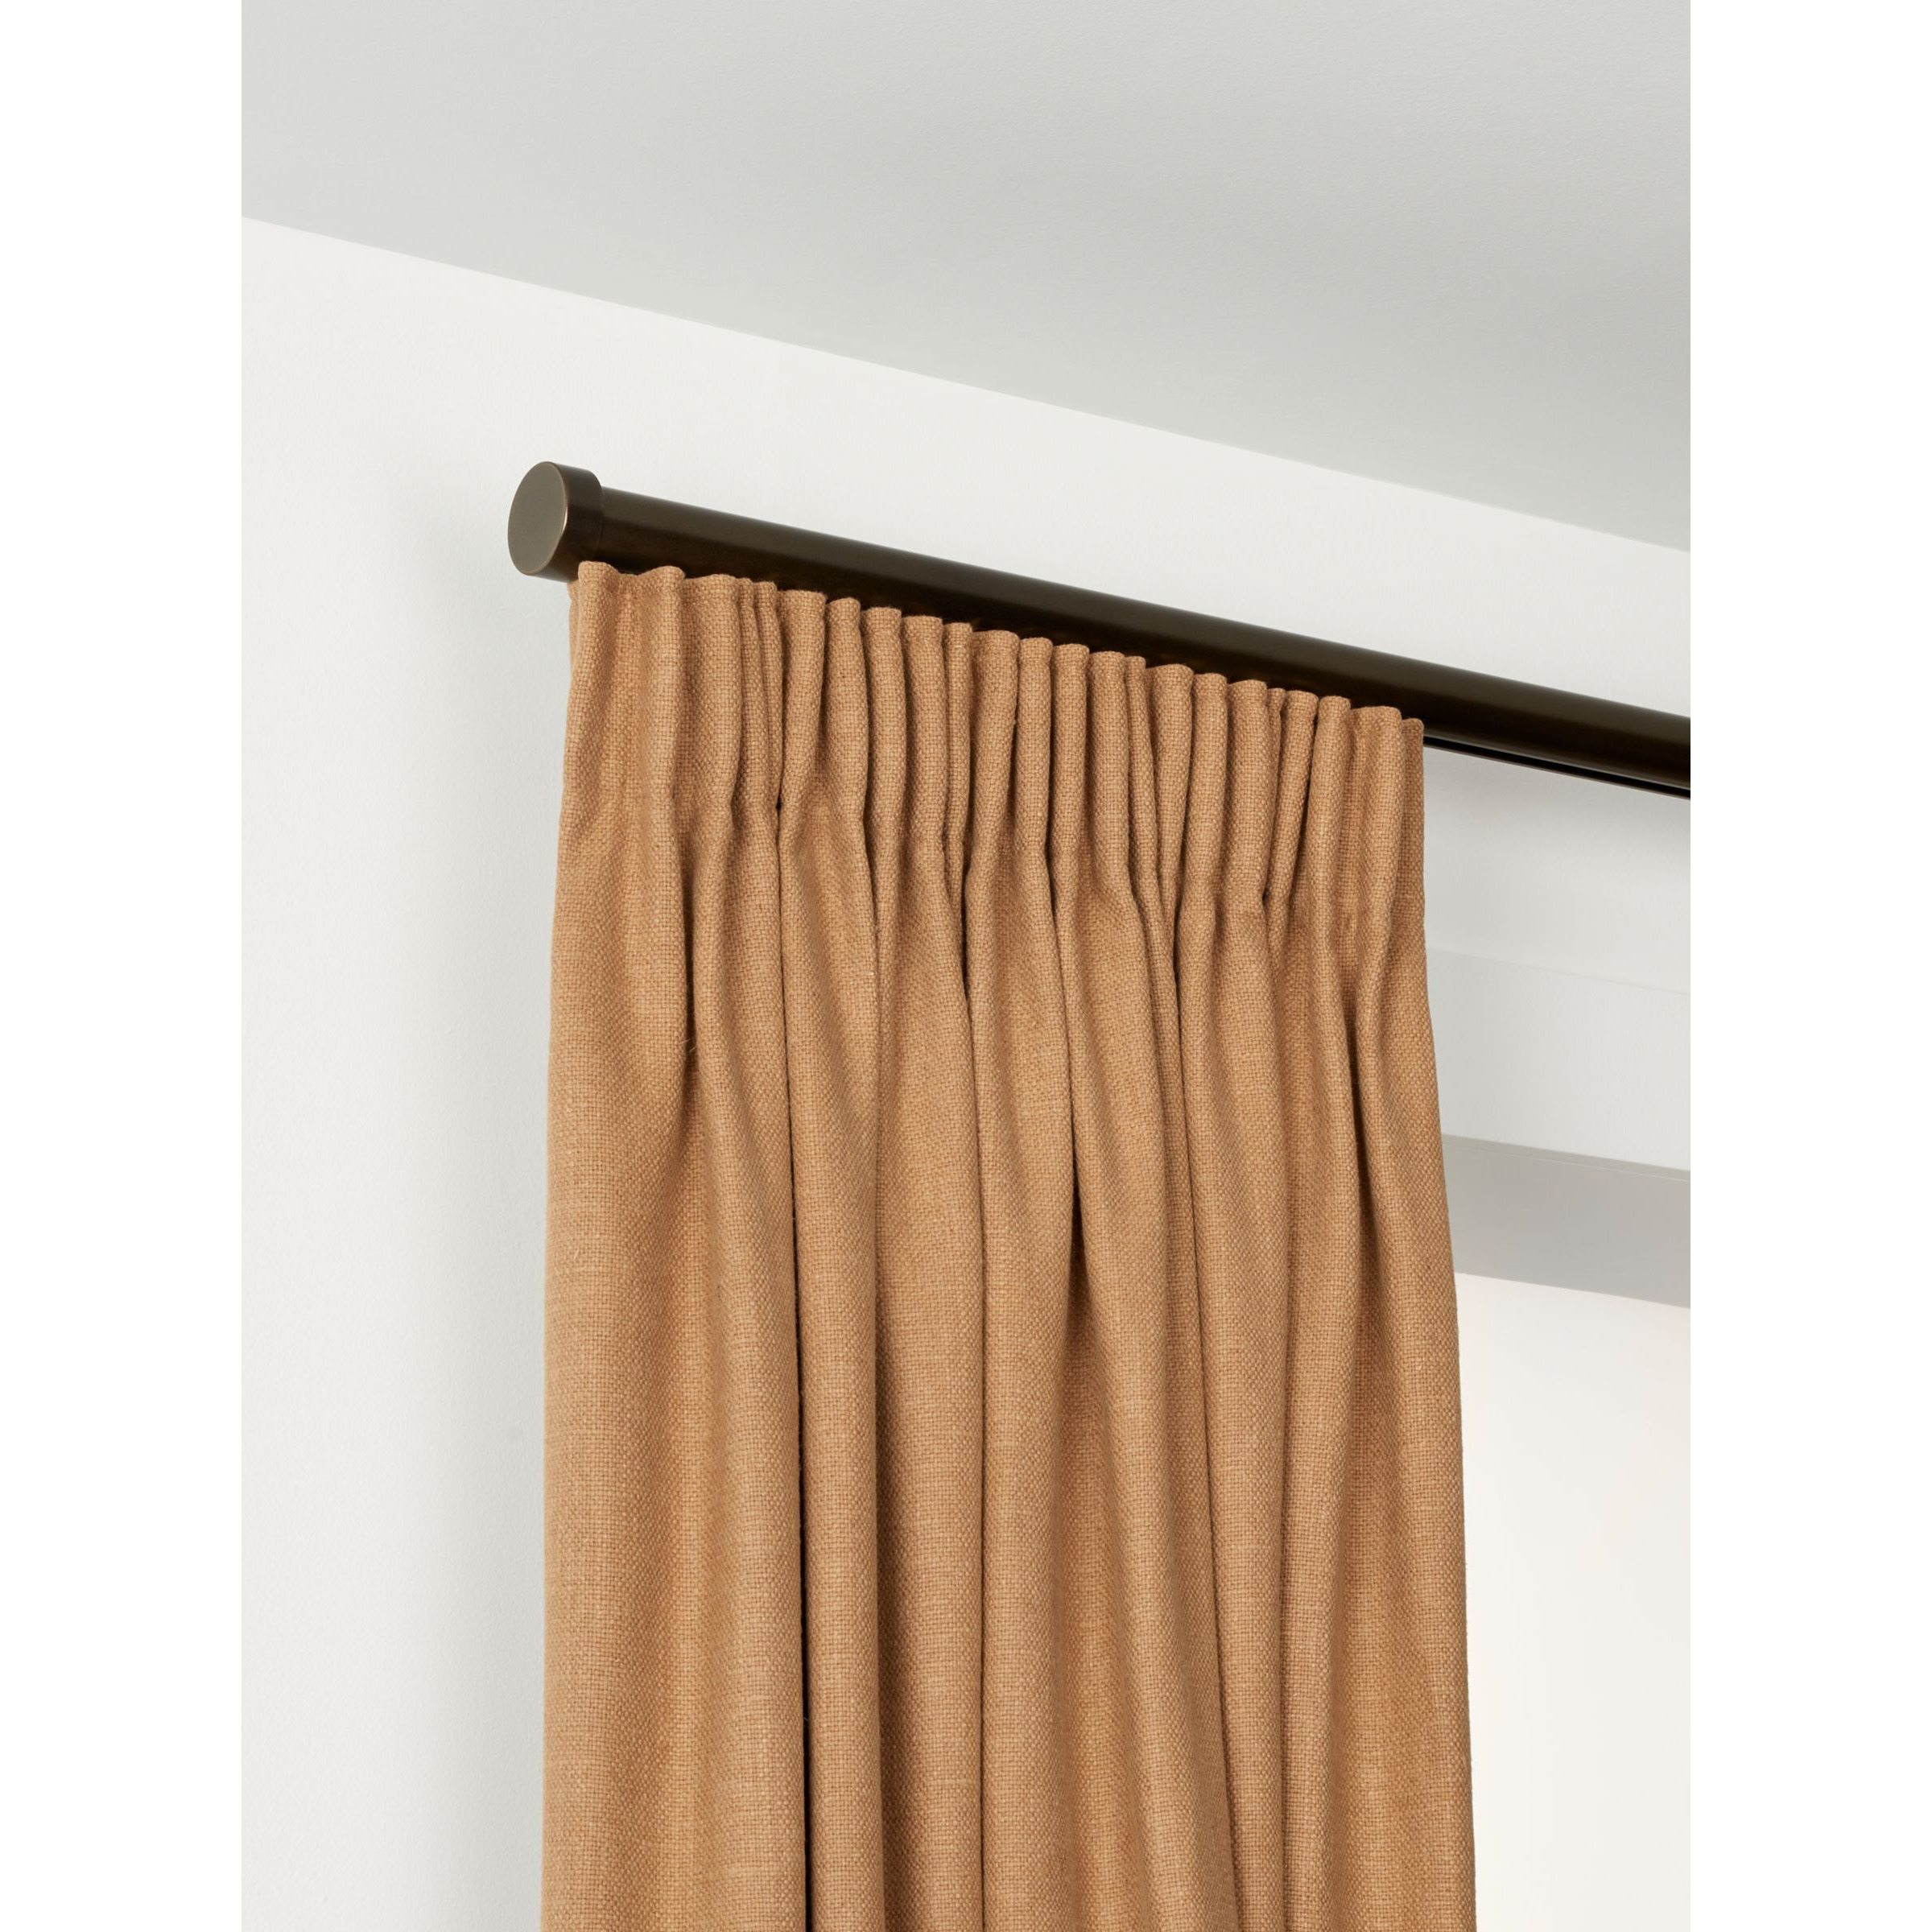 John Lewis Select Gliding Curtain Pole with Stud Finial, Wall Fix, Dia.30mm - image 1